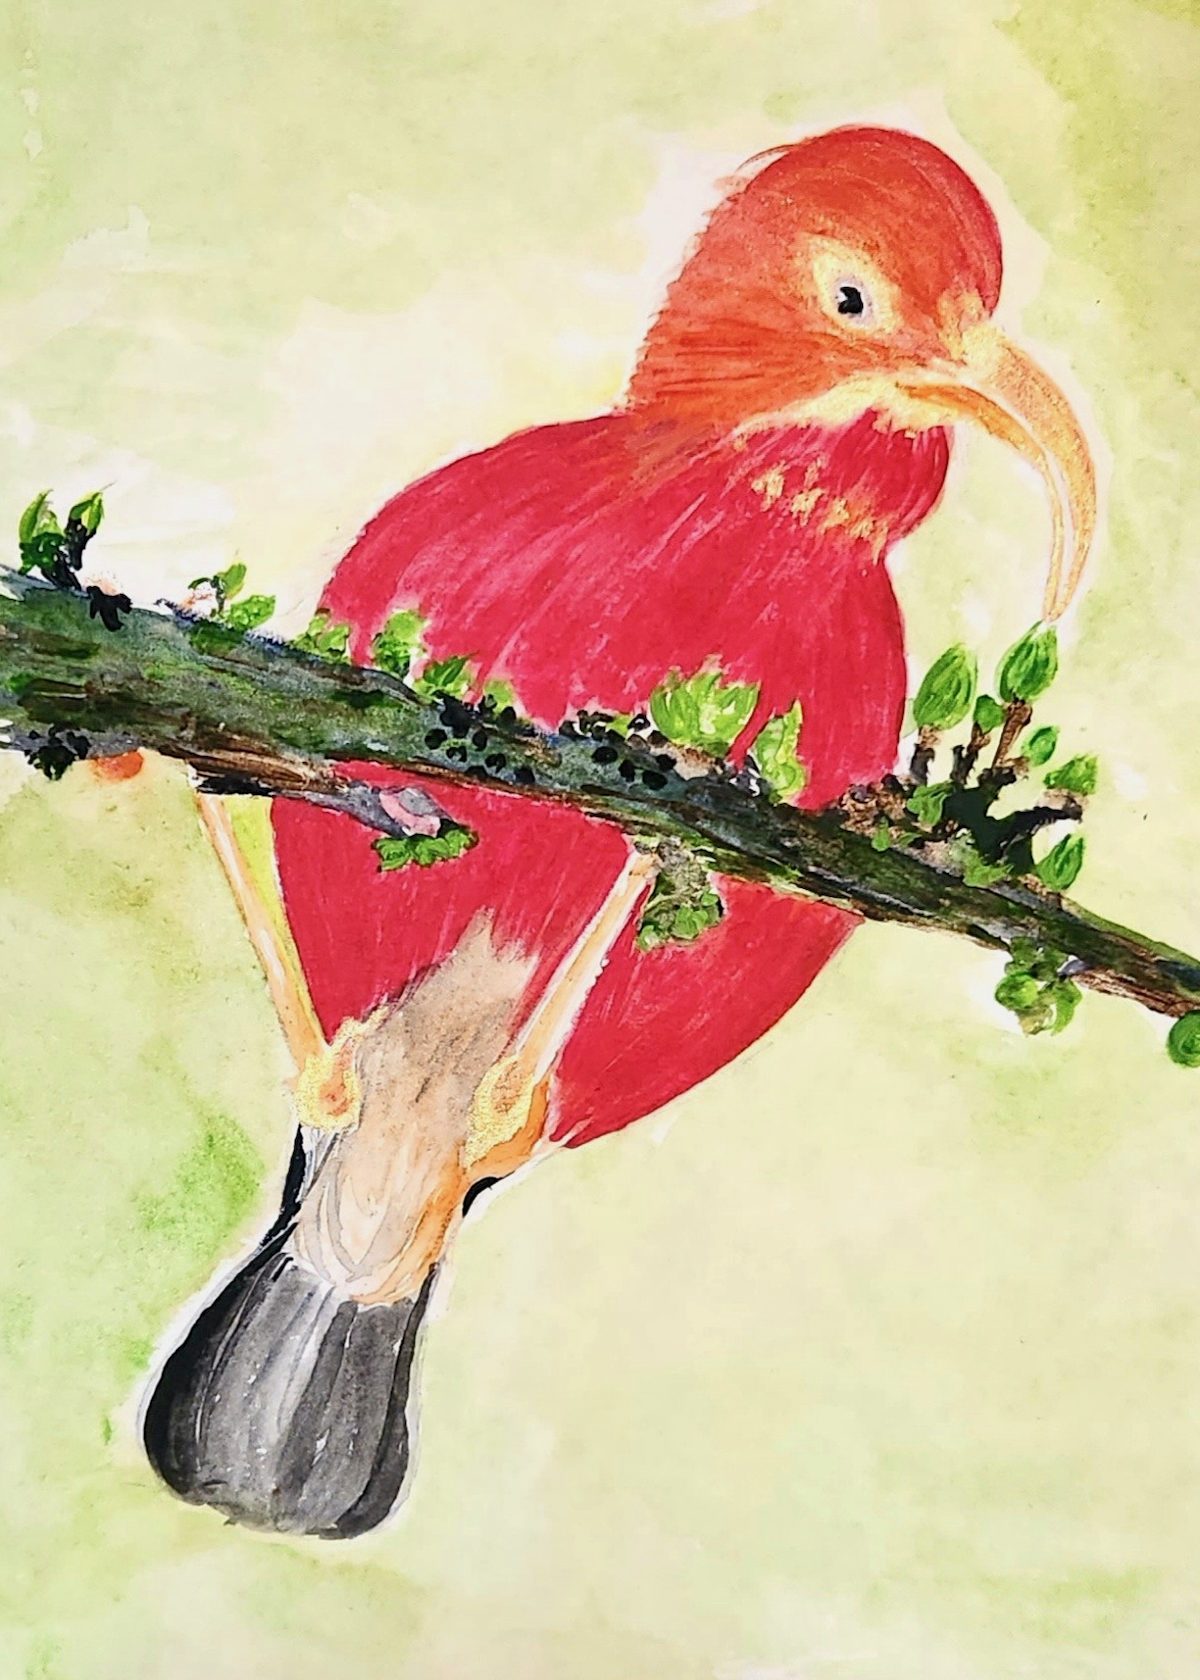 Painting of a red ʻIʻiwipolena bird hanging upside-down from a branch